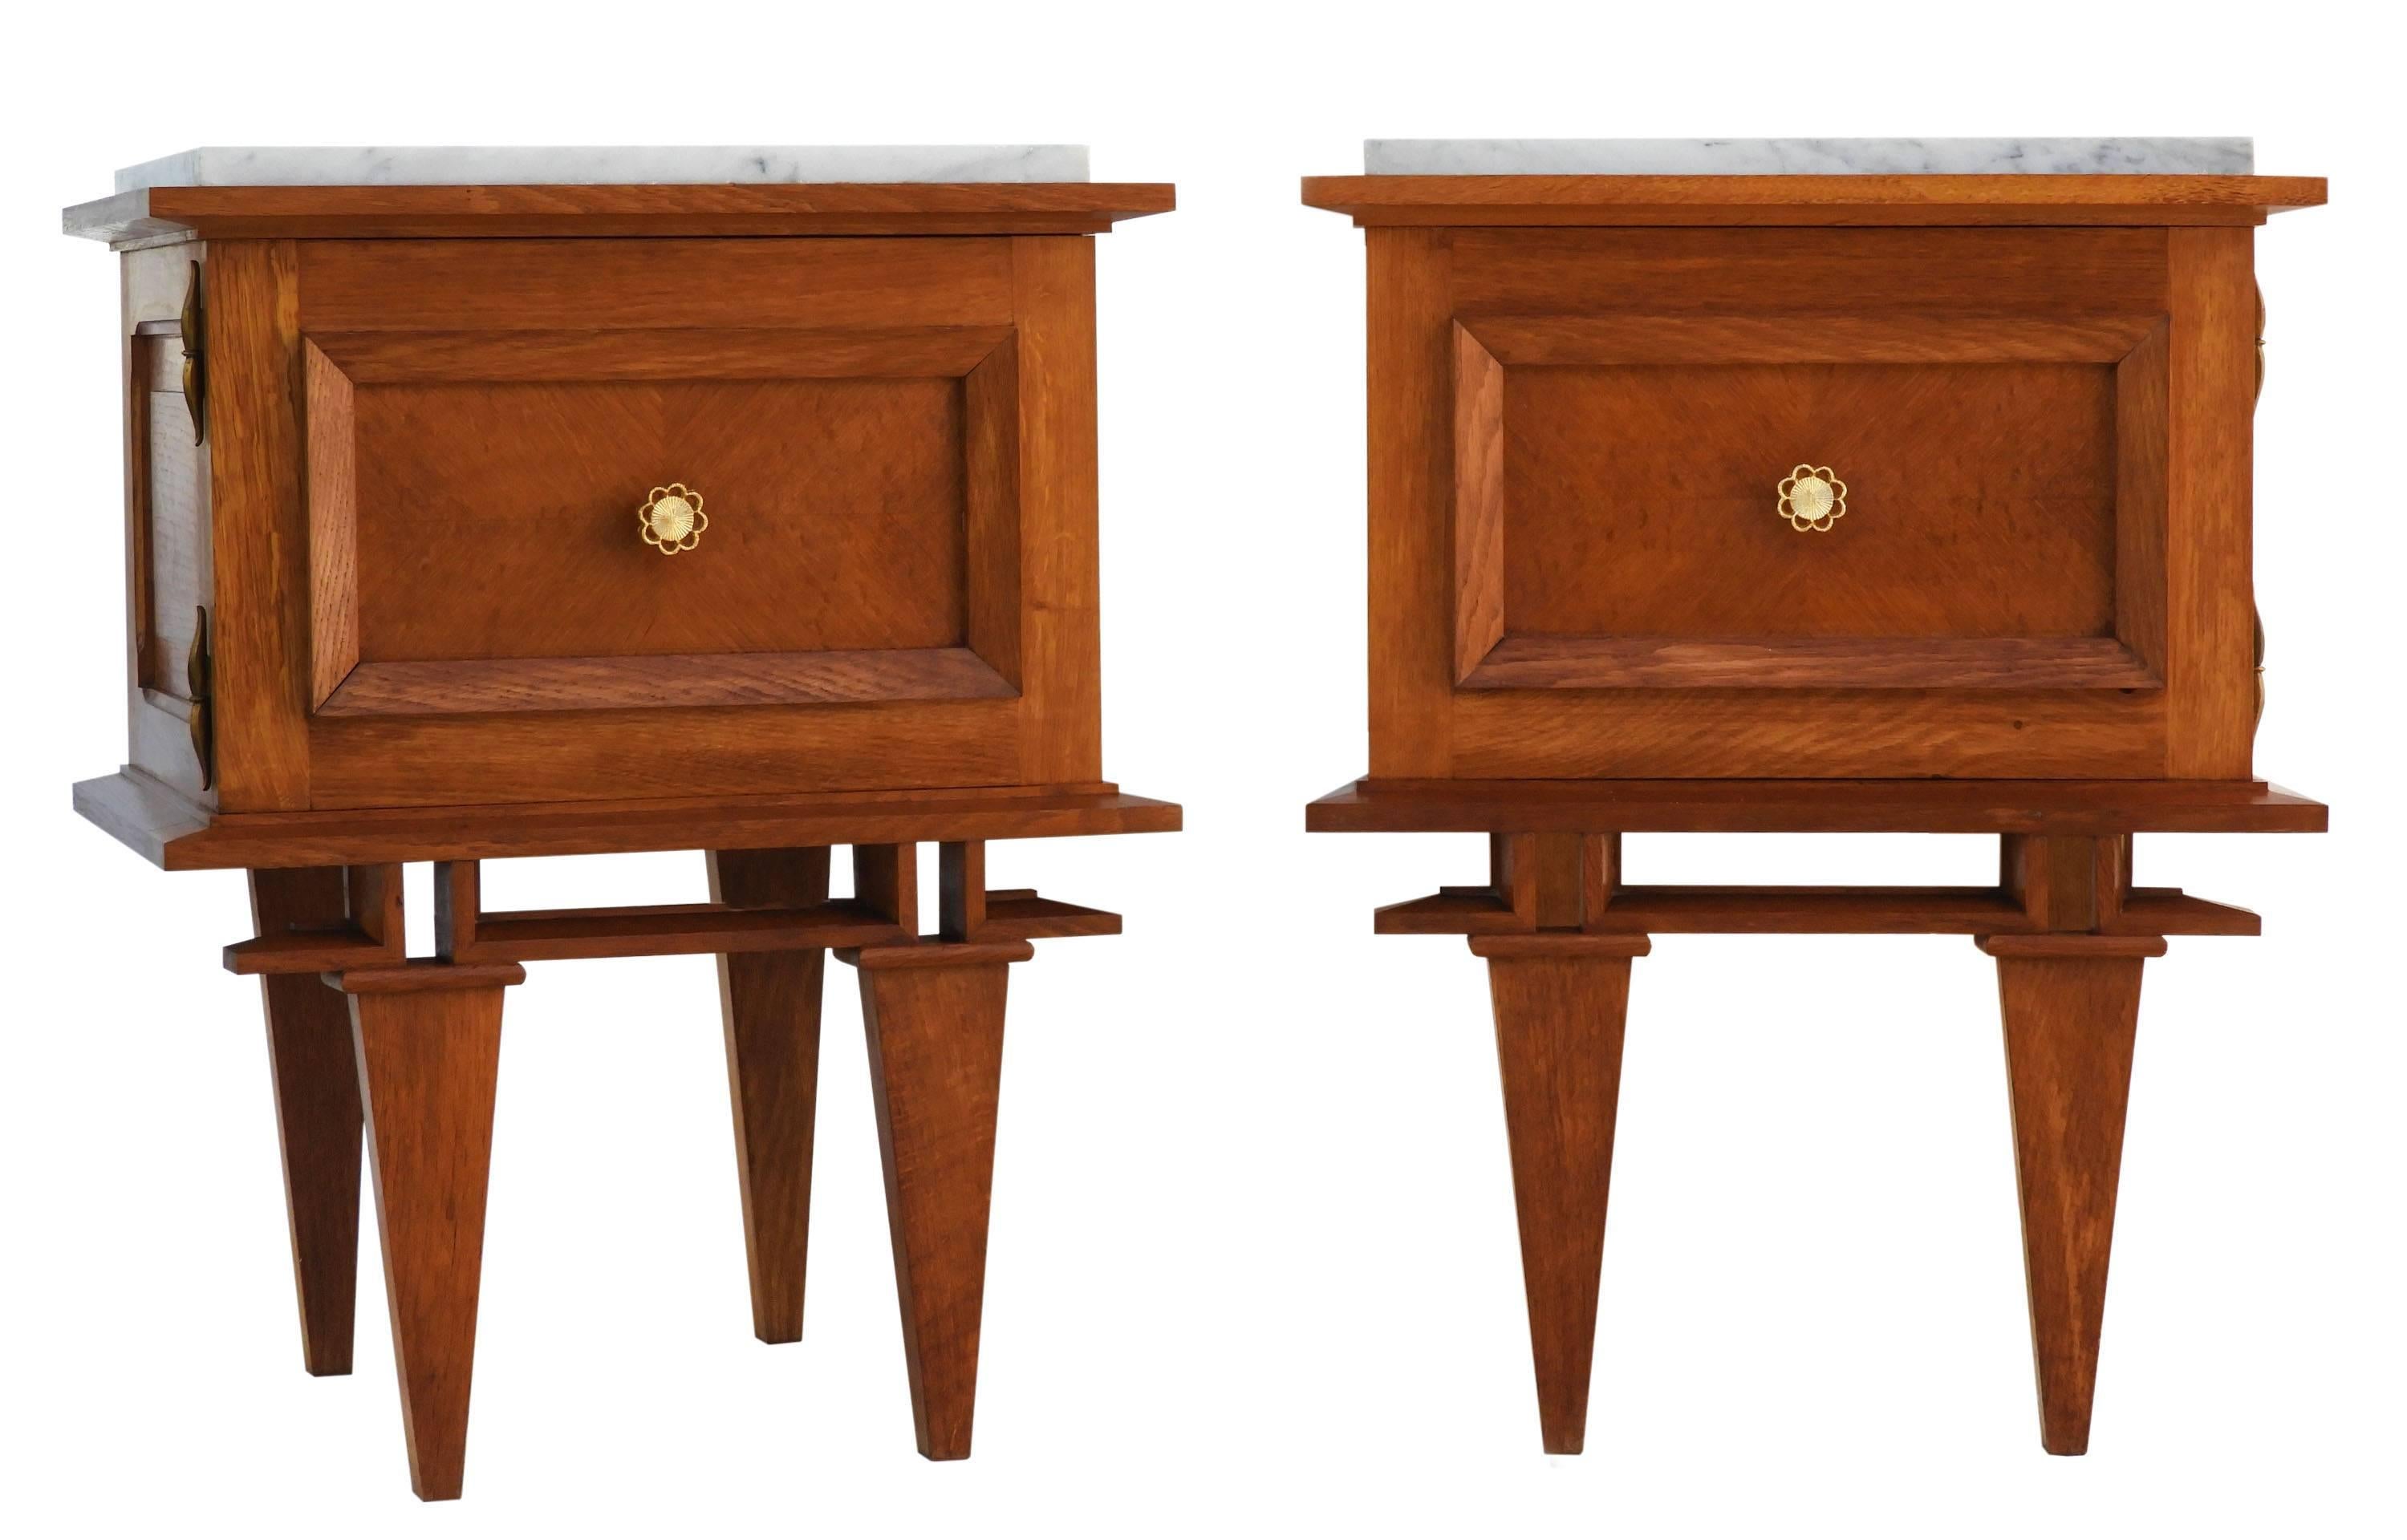 Pair of side cabinets midcentury nightstands bedside tables French, circa 1950
Solid oak cabinets with decorative gilt metal handles and marble tops
Very good condition for their age with only very minor marks of use.
There is also a matching bed